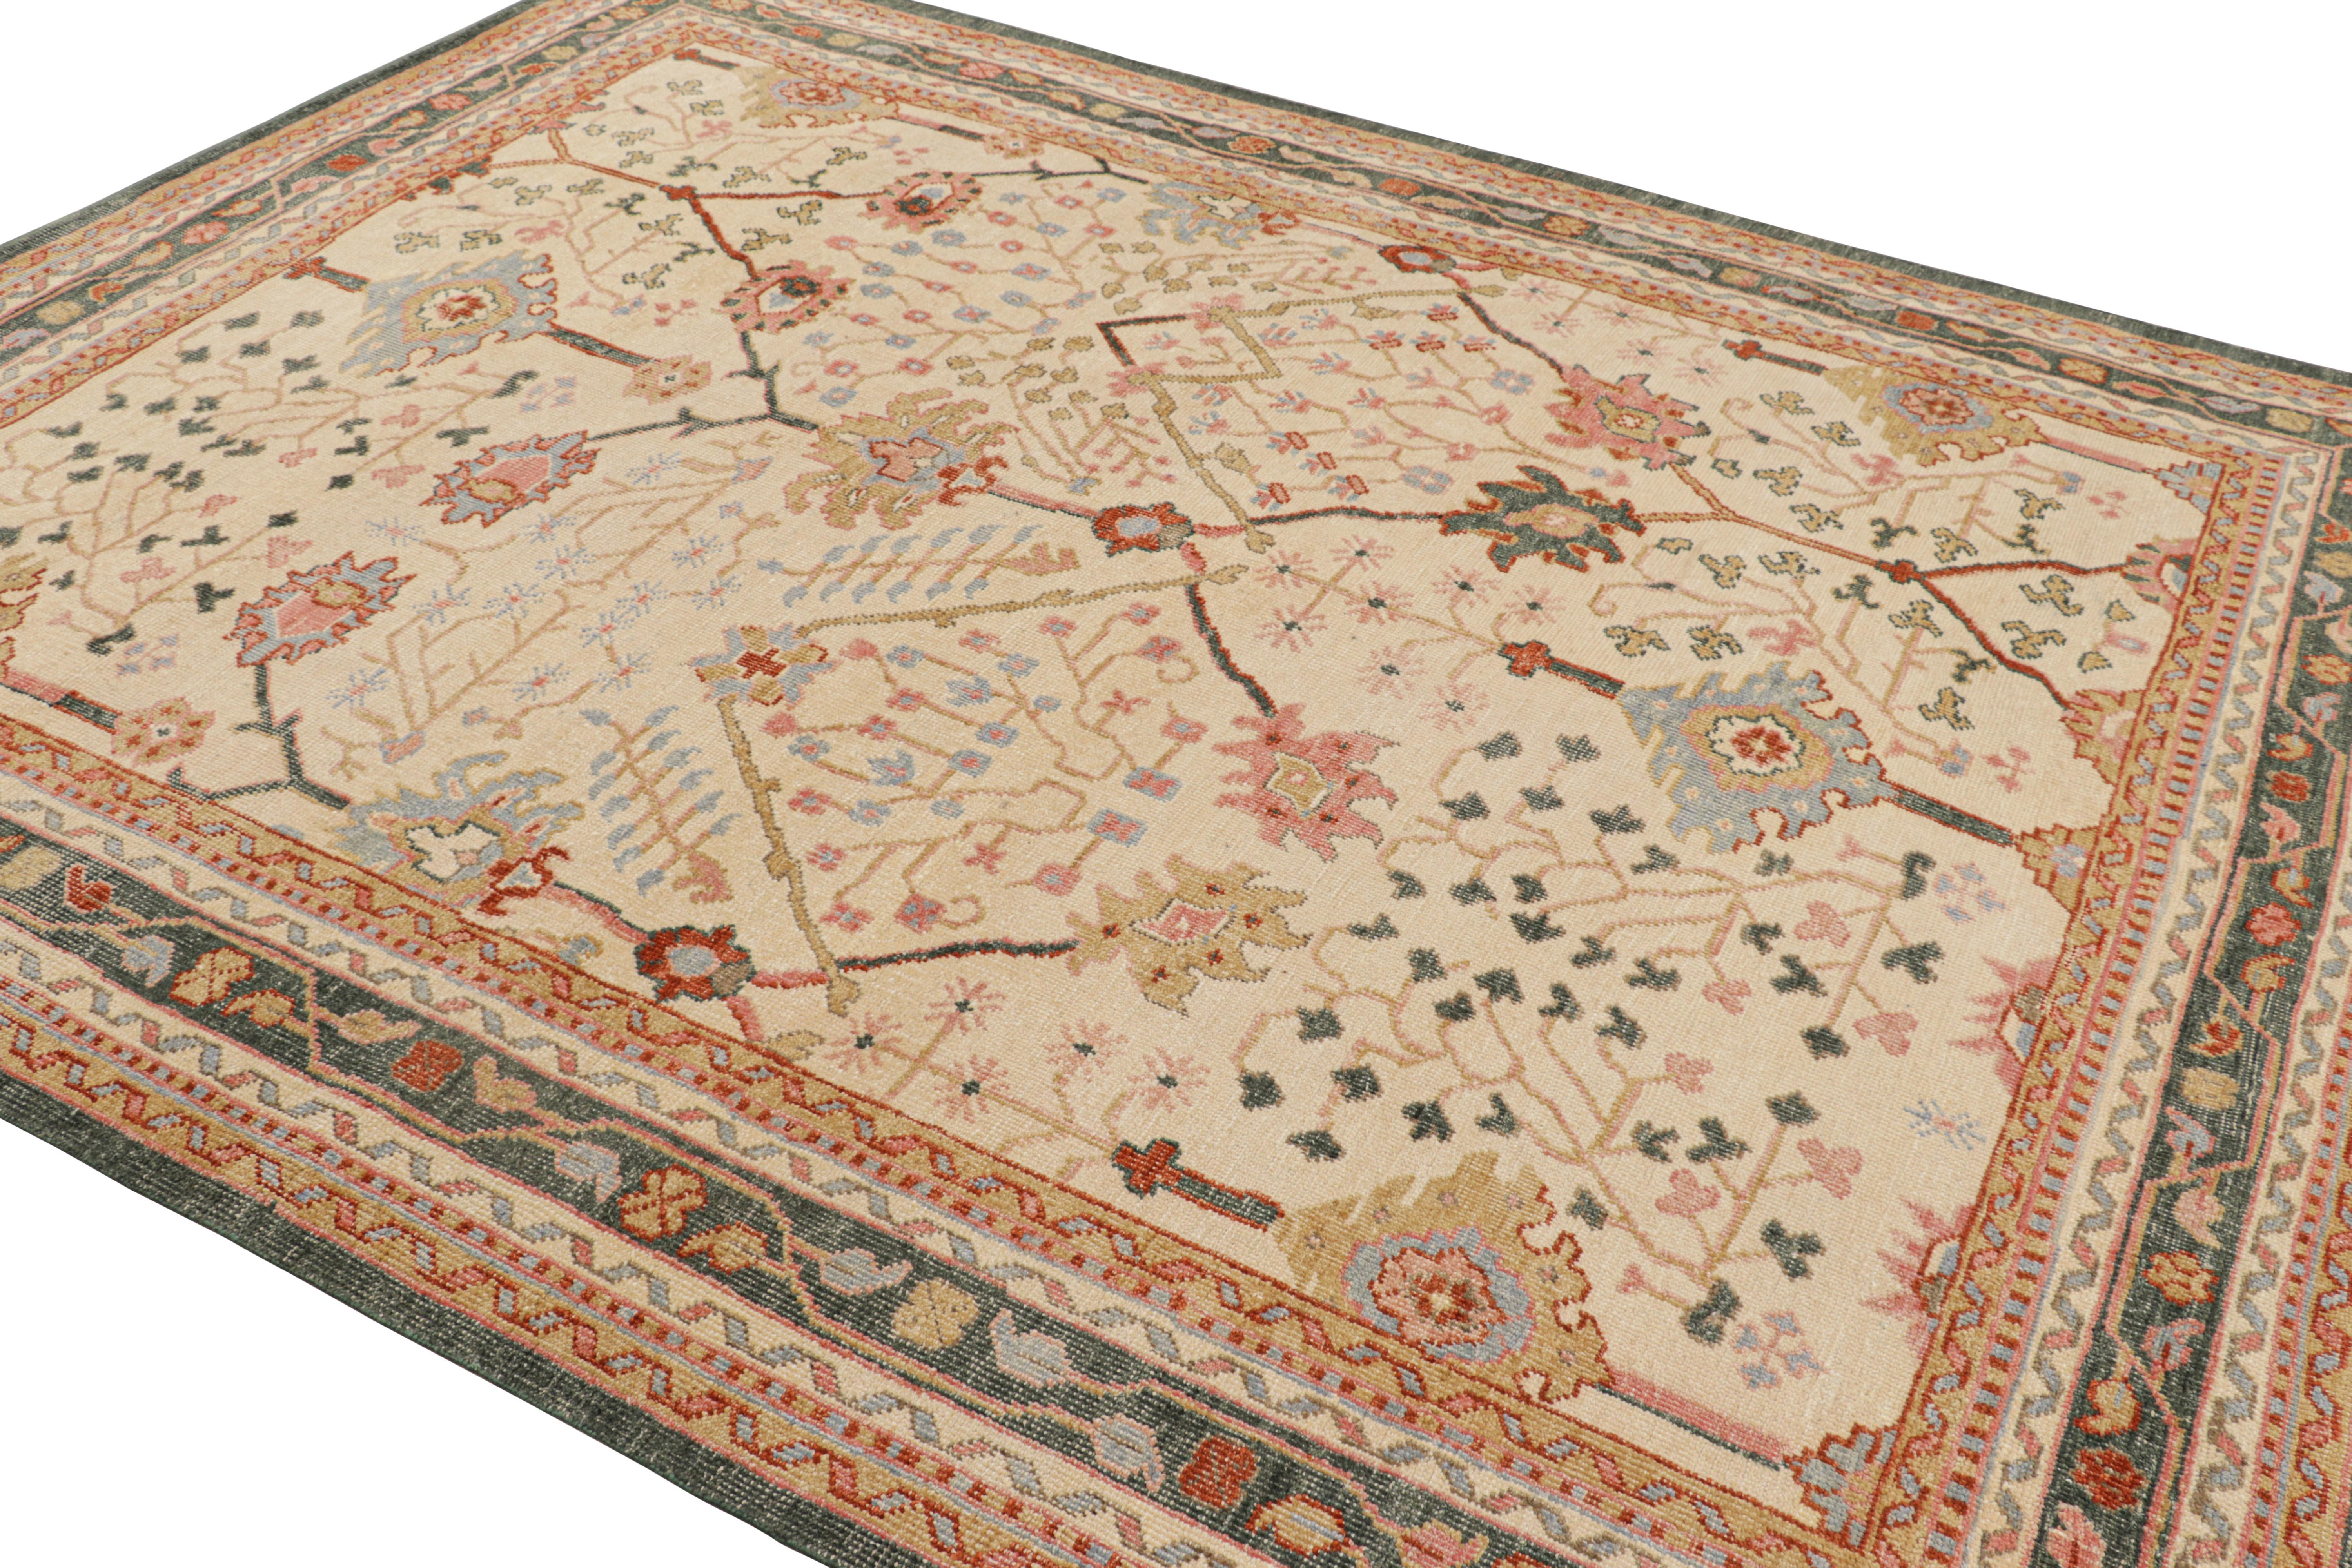 Indian Rug & Kilim’s Oushak Style Rug in Beige-Brown with Colorful Floral Patterns For Sale